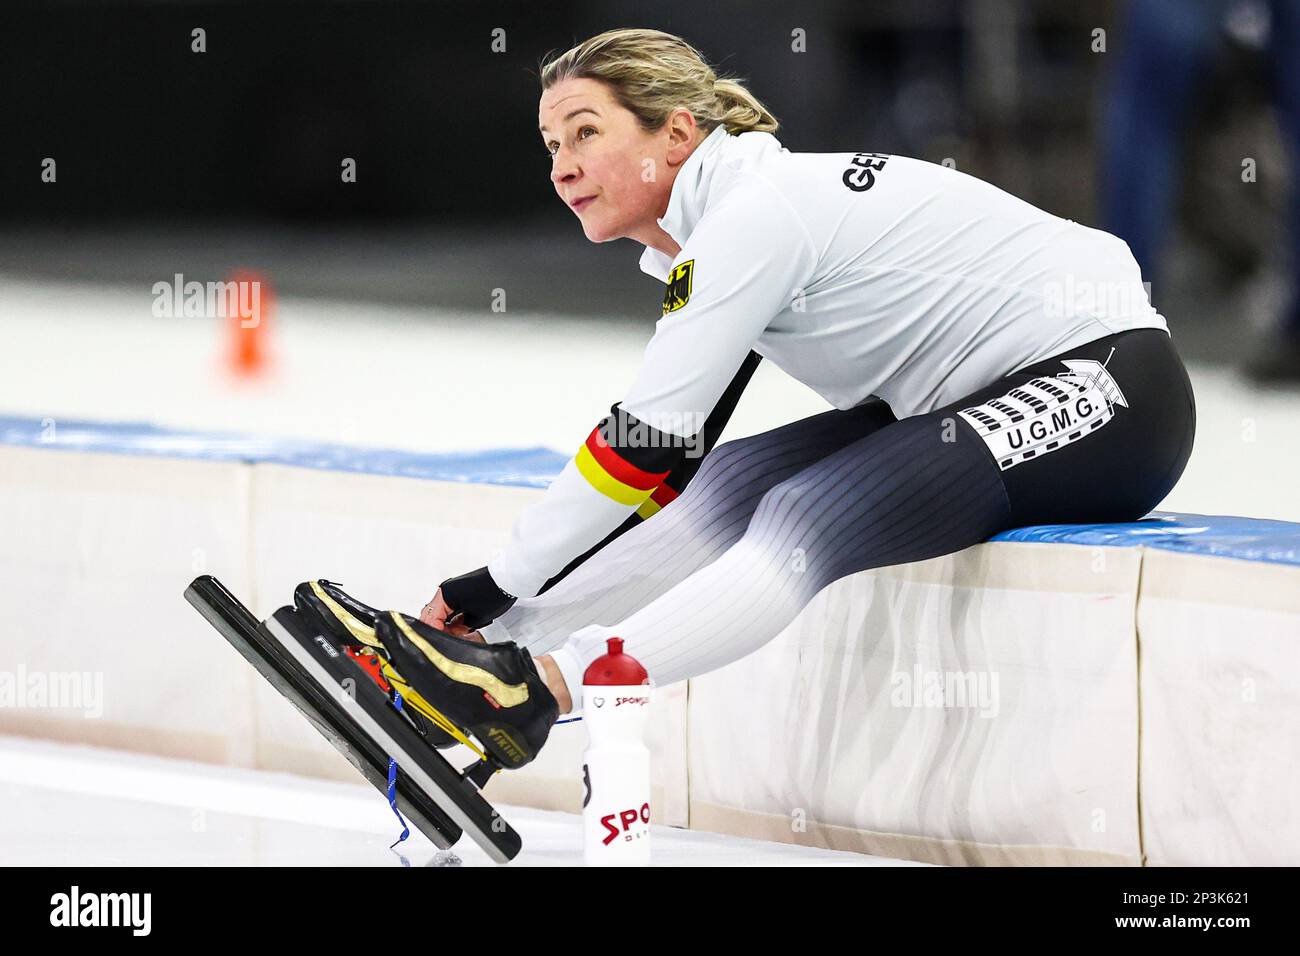 HERENVEEN - Claudia Pechstein (GER) during the 5000 meters for women at the ISU World Speed Skating Championships in Thialf. ANP VINCENT JANNINK Stock Photo